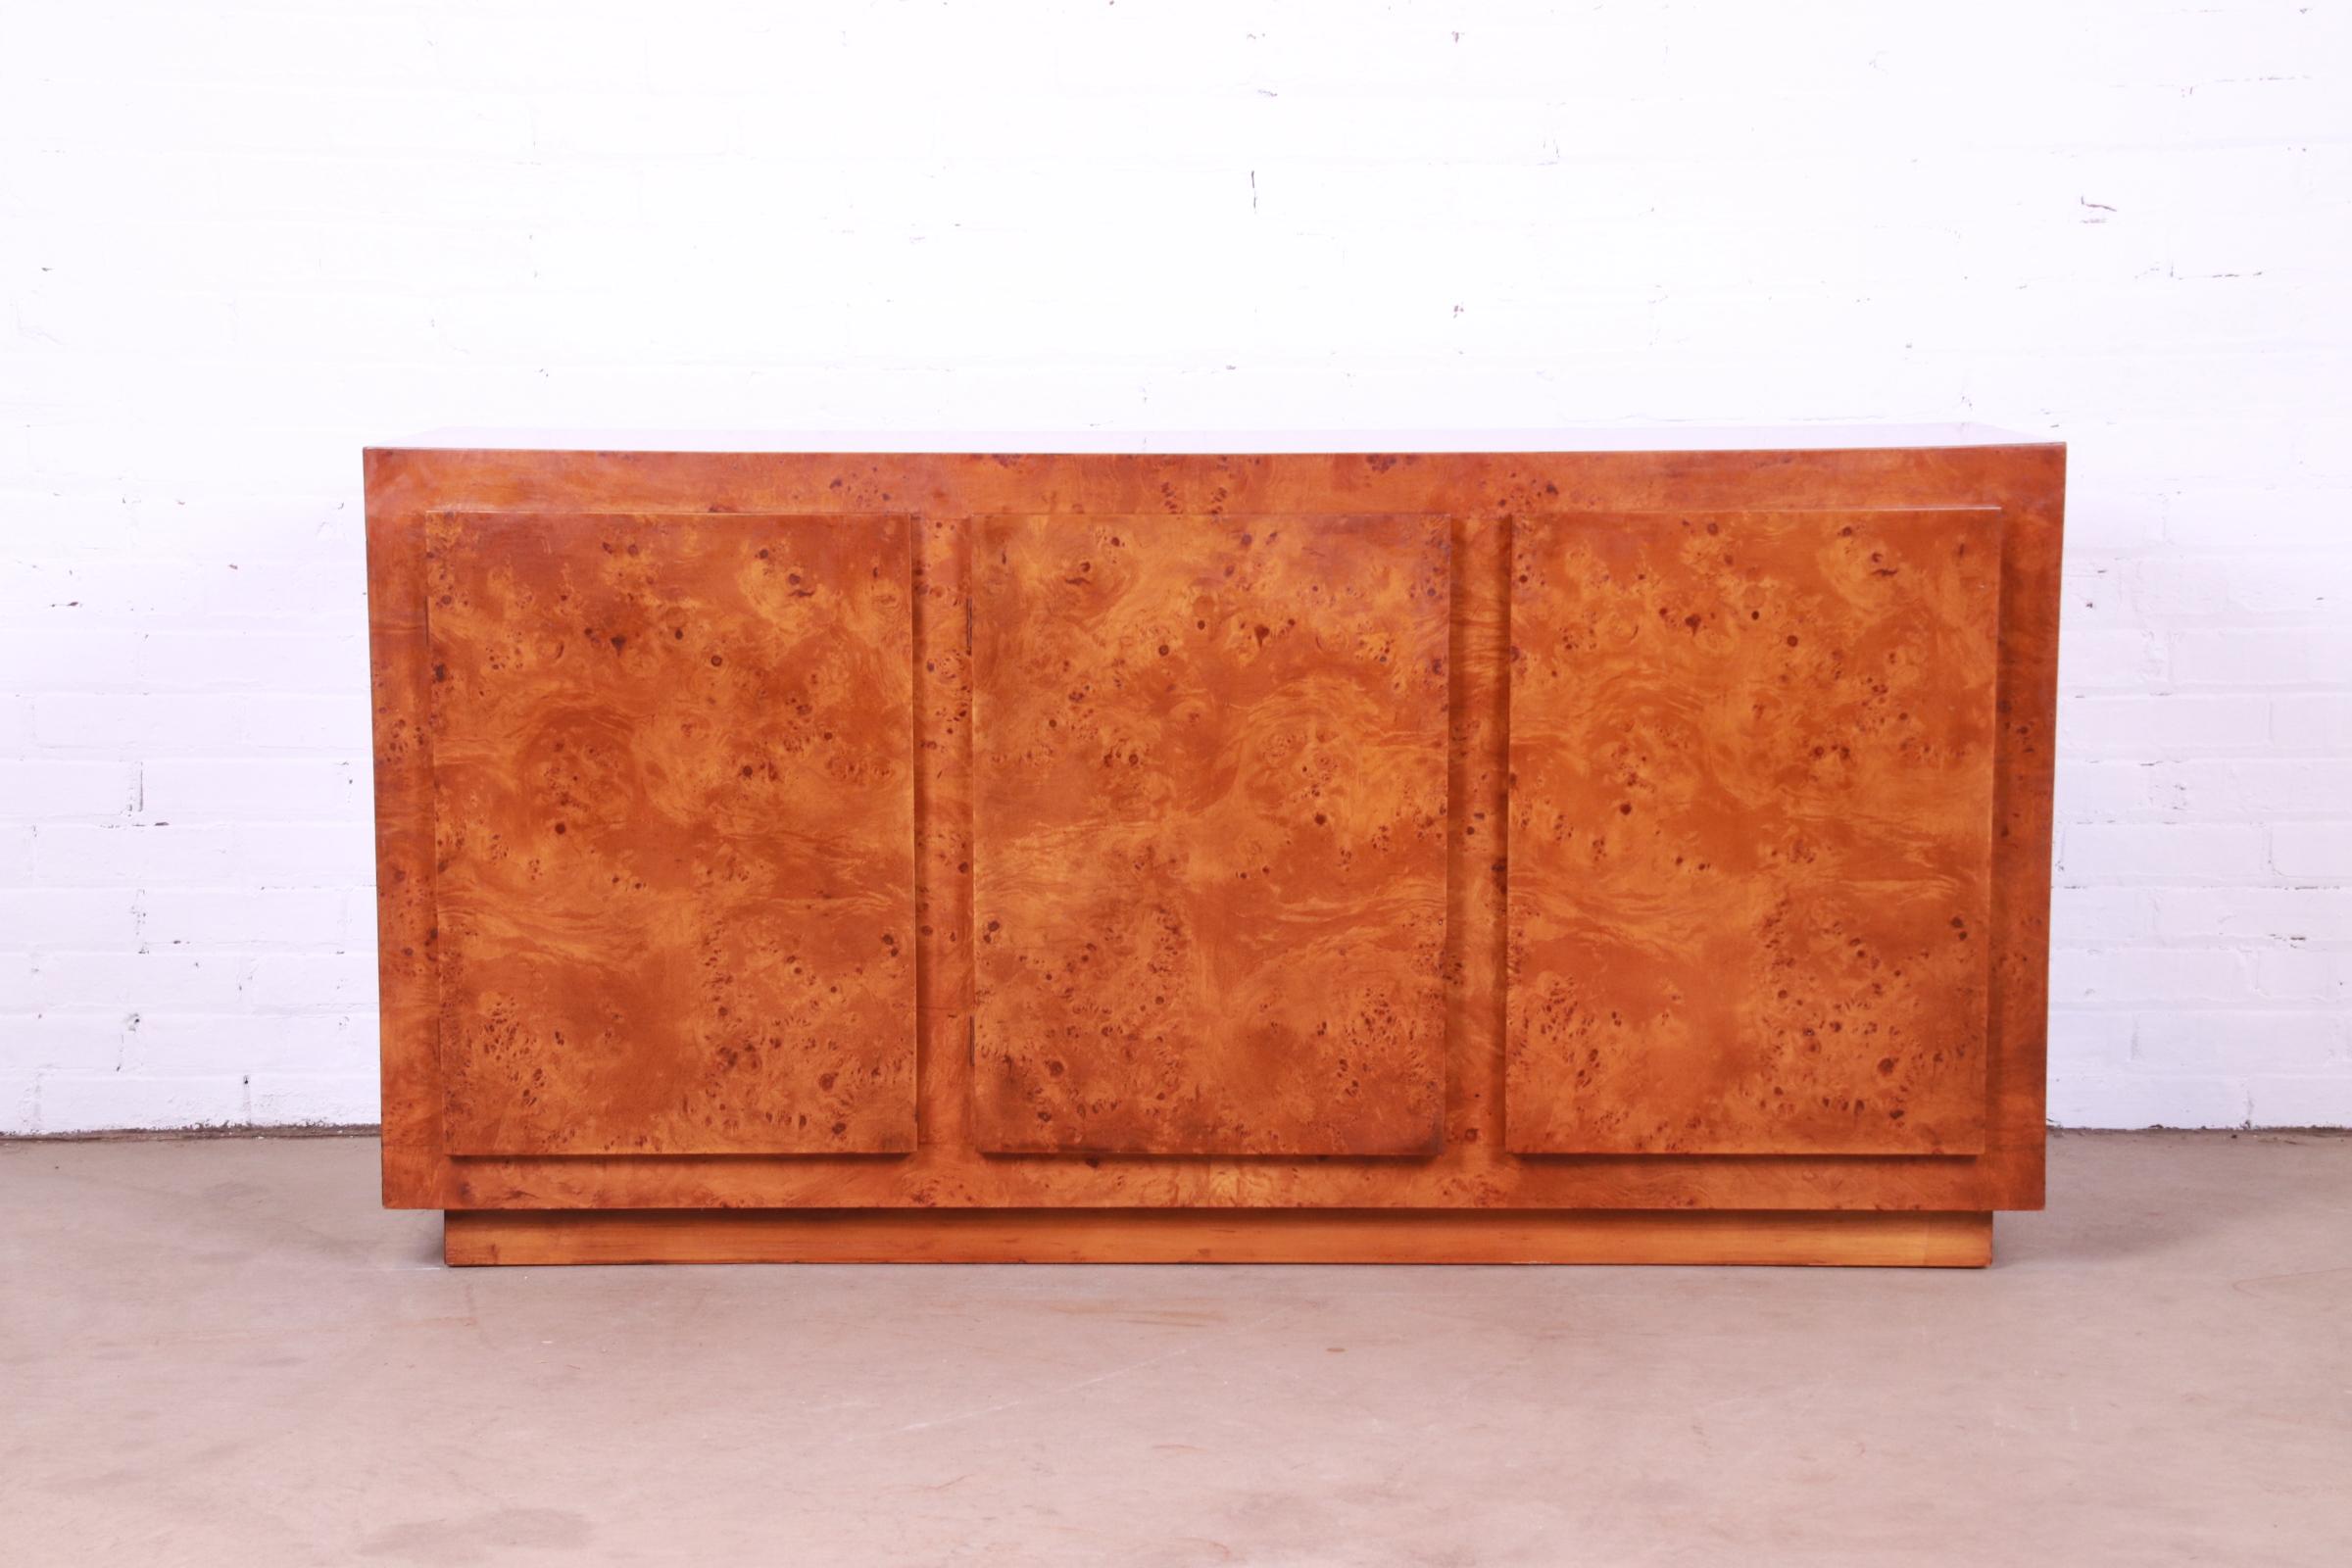 A gorgeous mid-century modern burl wood sideboard, credenza, or bar cabinet

In the manner of Milo Baughman

USA, Circa 1970s

Measures: 60